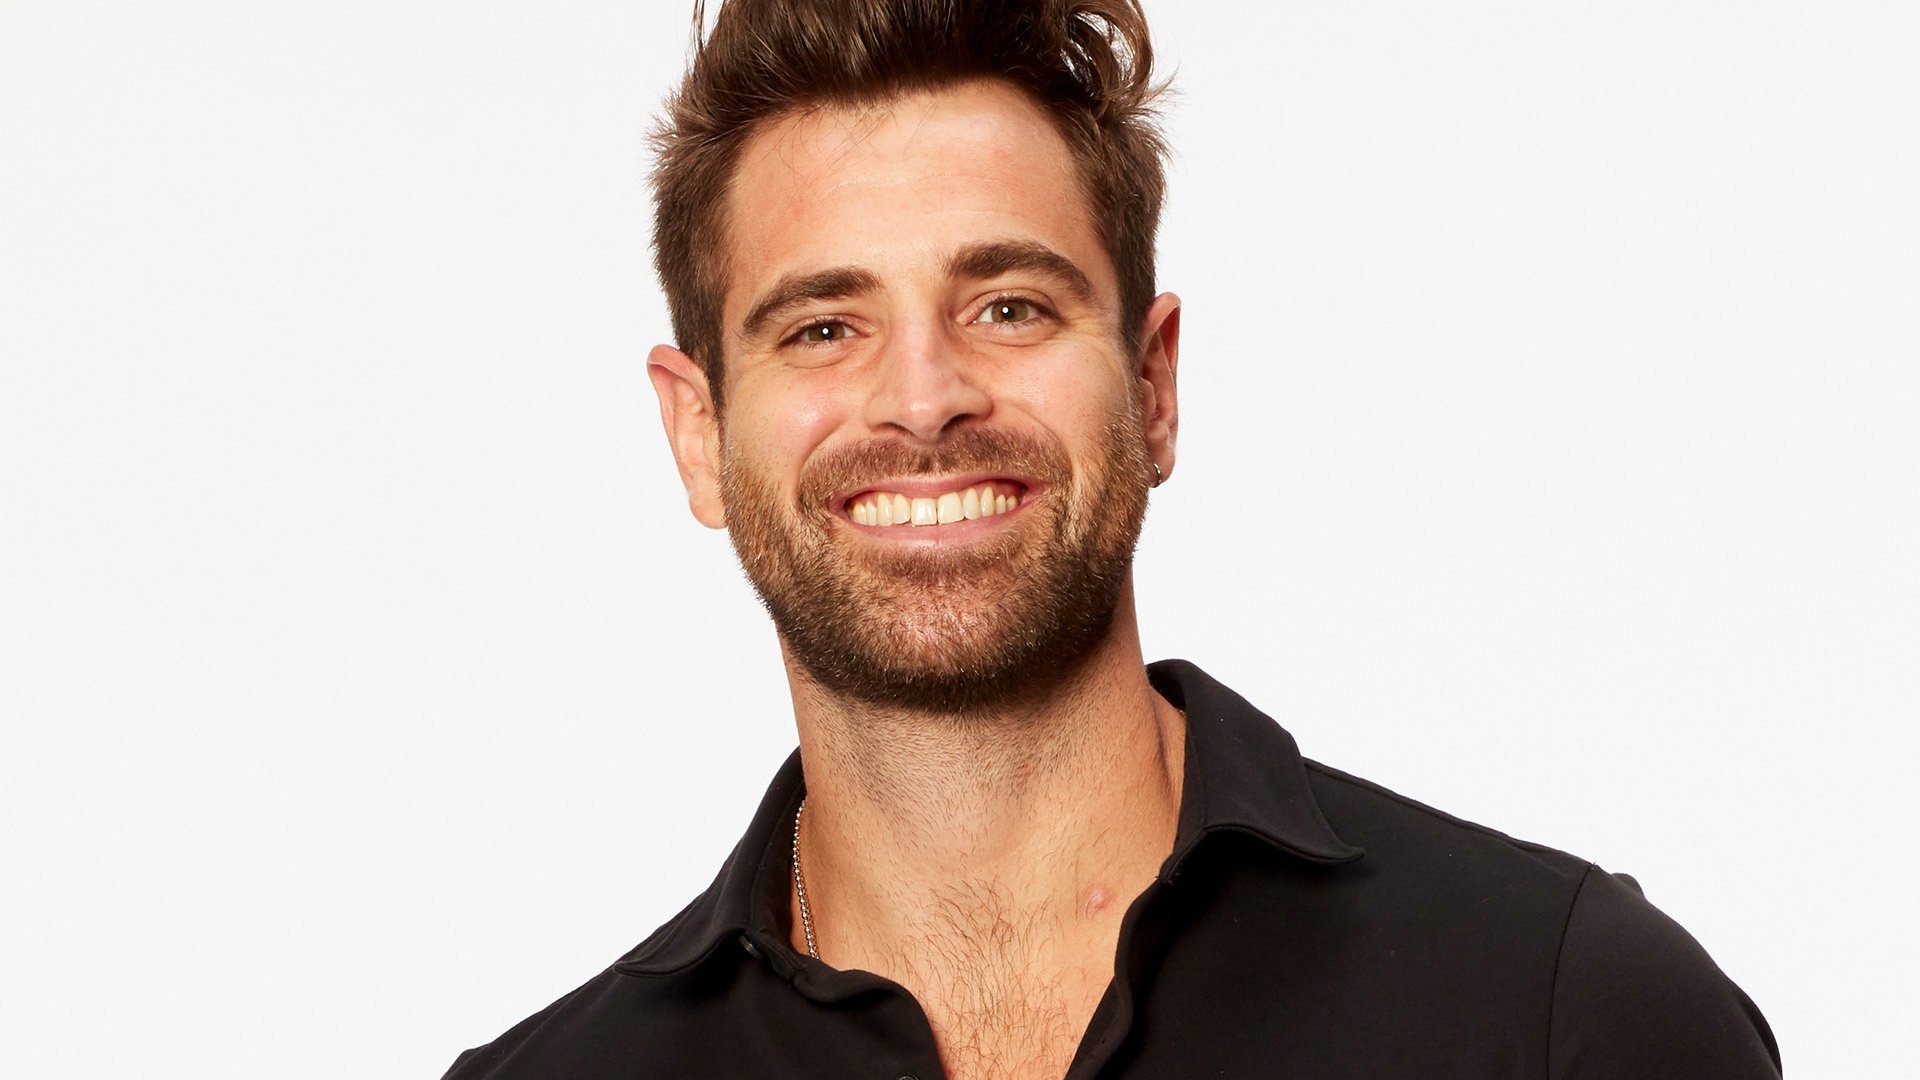 Headshot of Blake Monar from ‘Bachelor in Paradise’ and ‘The Bachelorette’